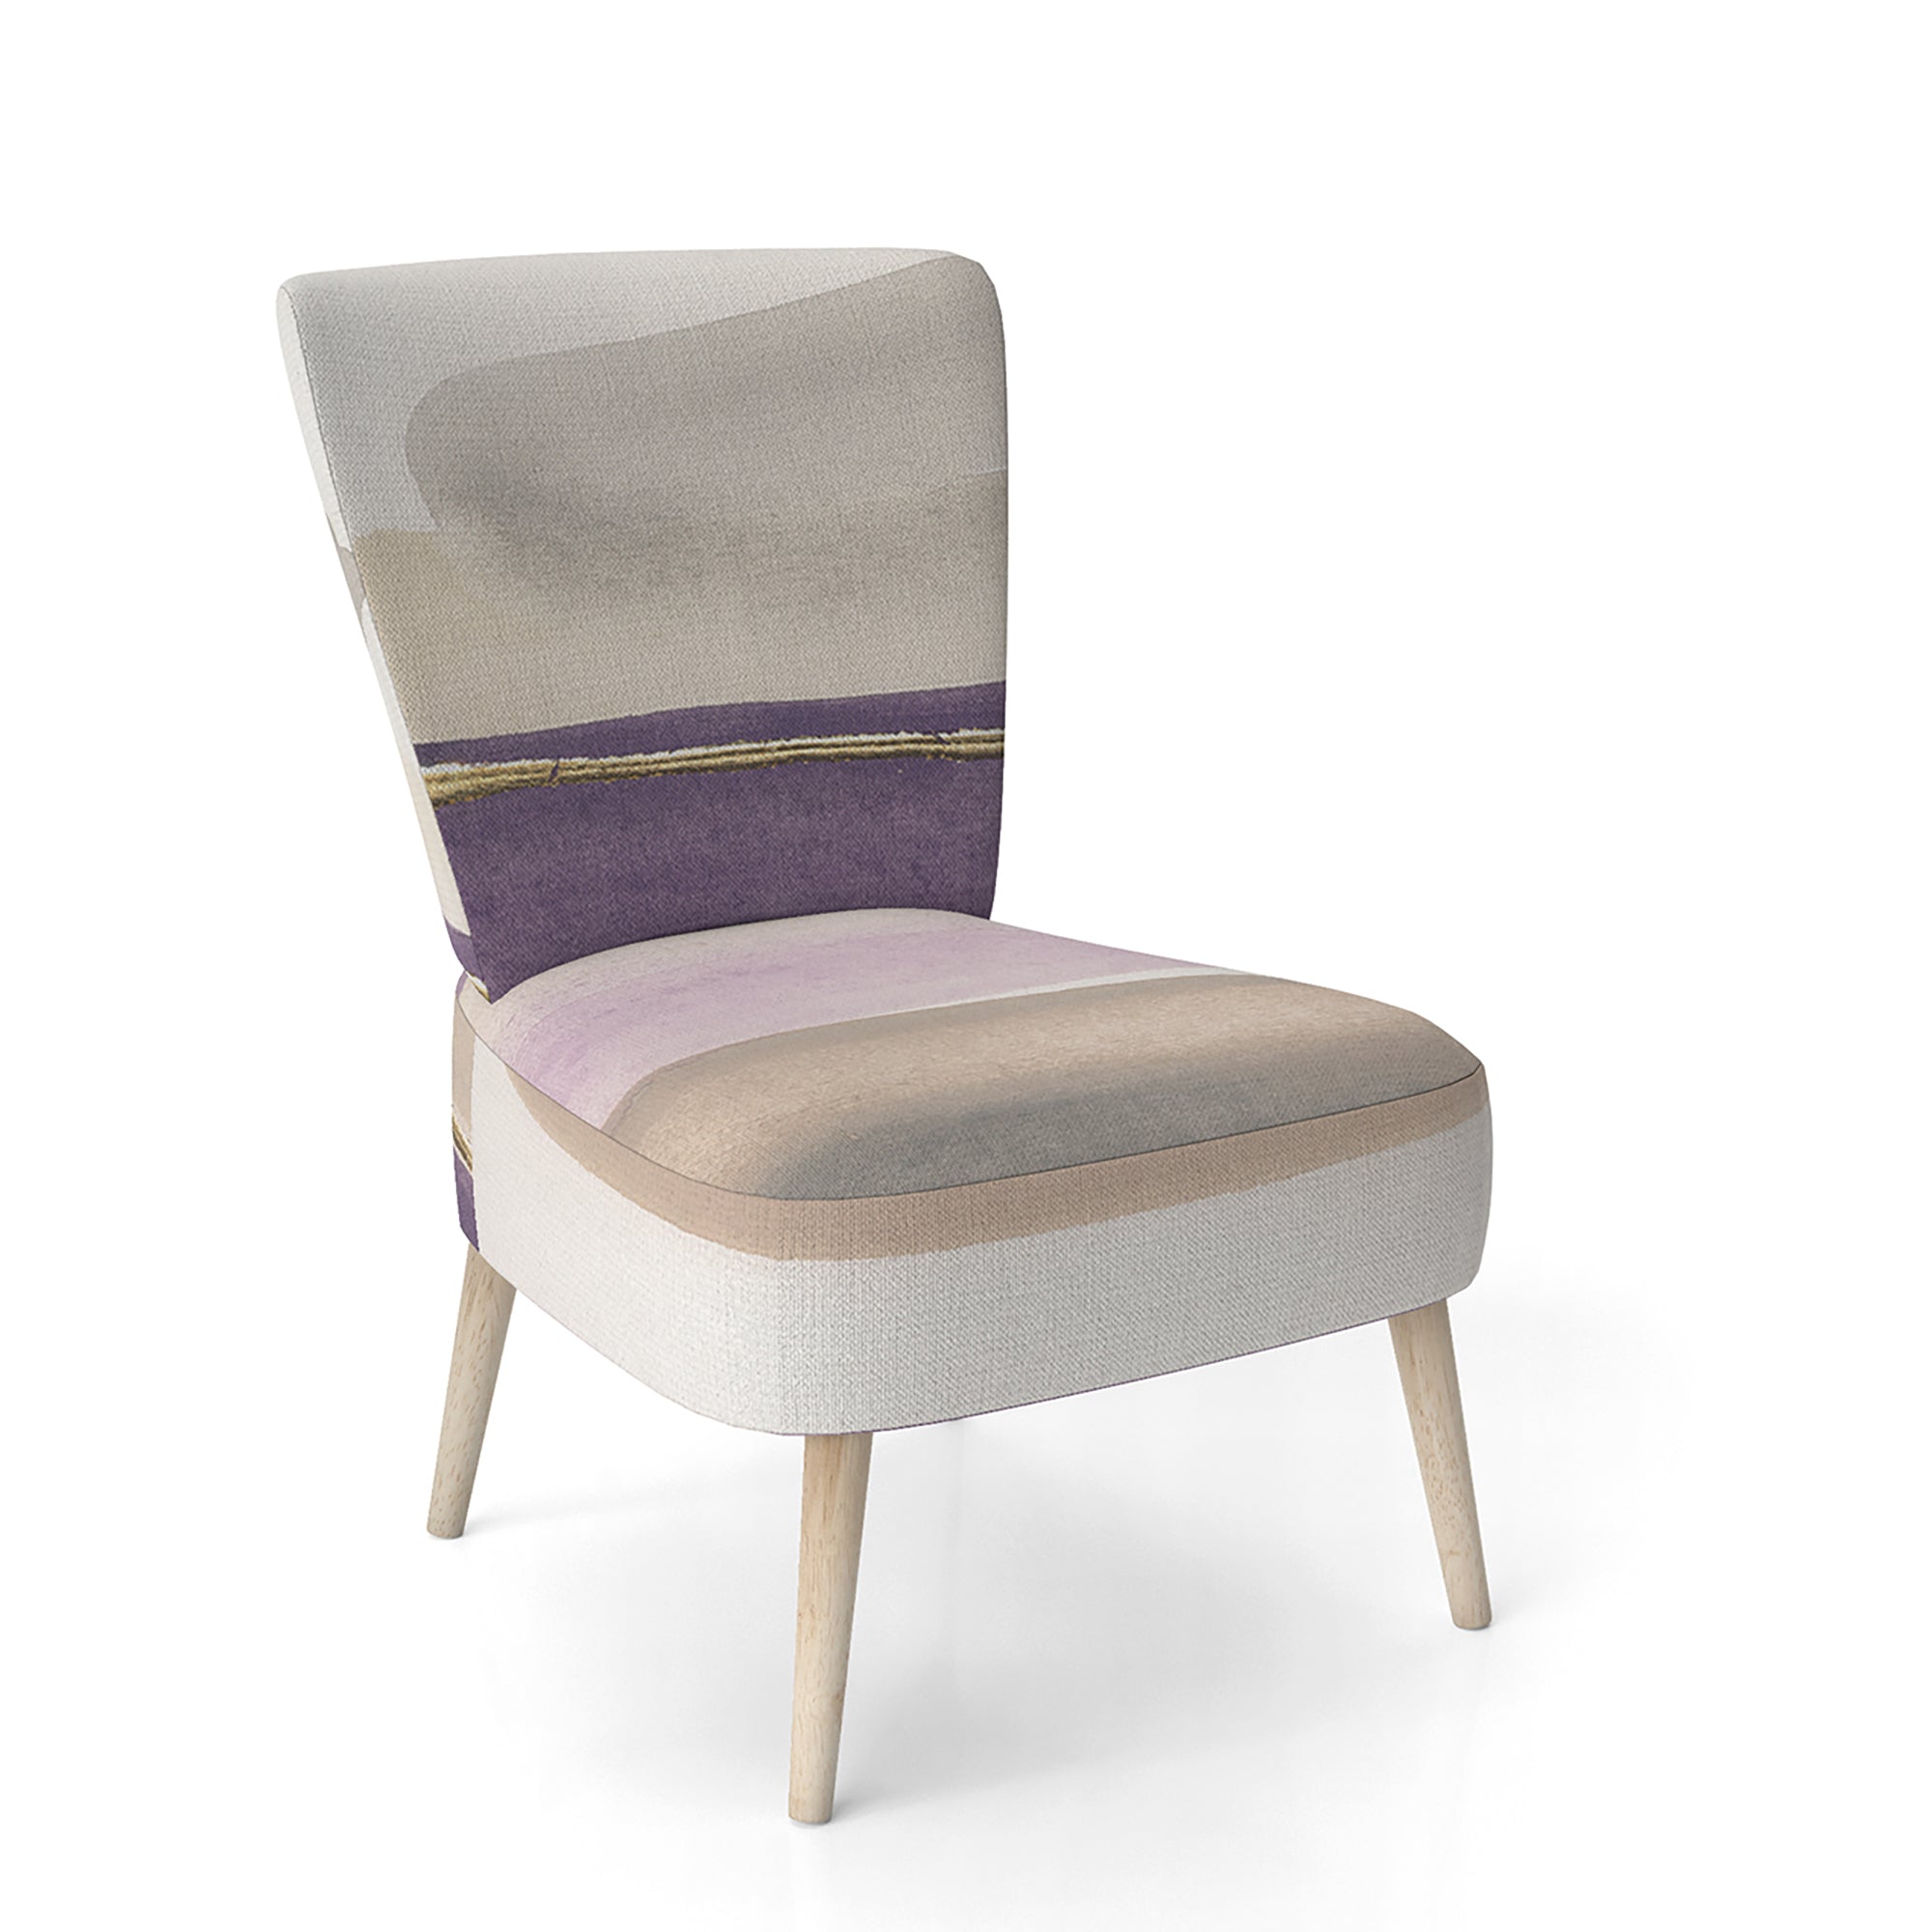 Shape of Glam Purple Shabby Chic Accent Chair